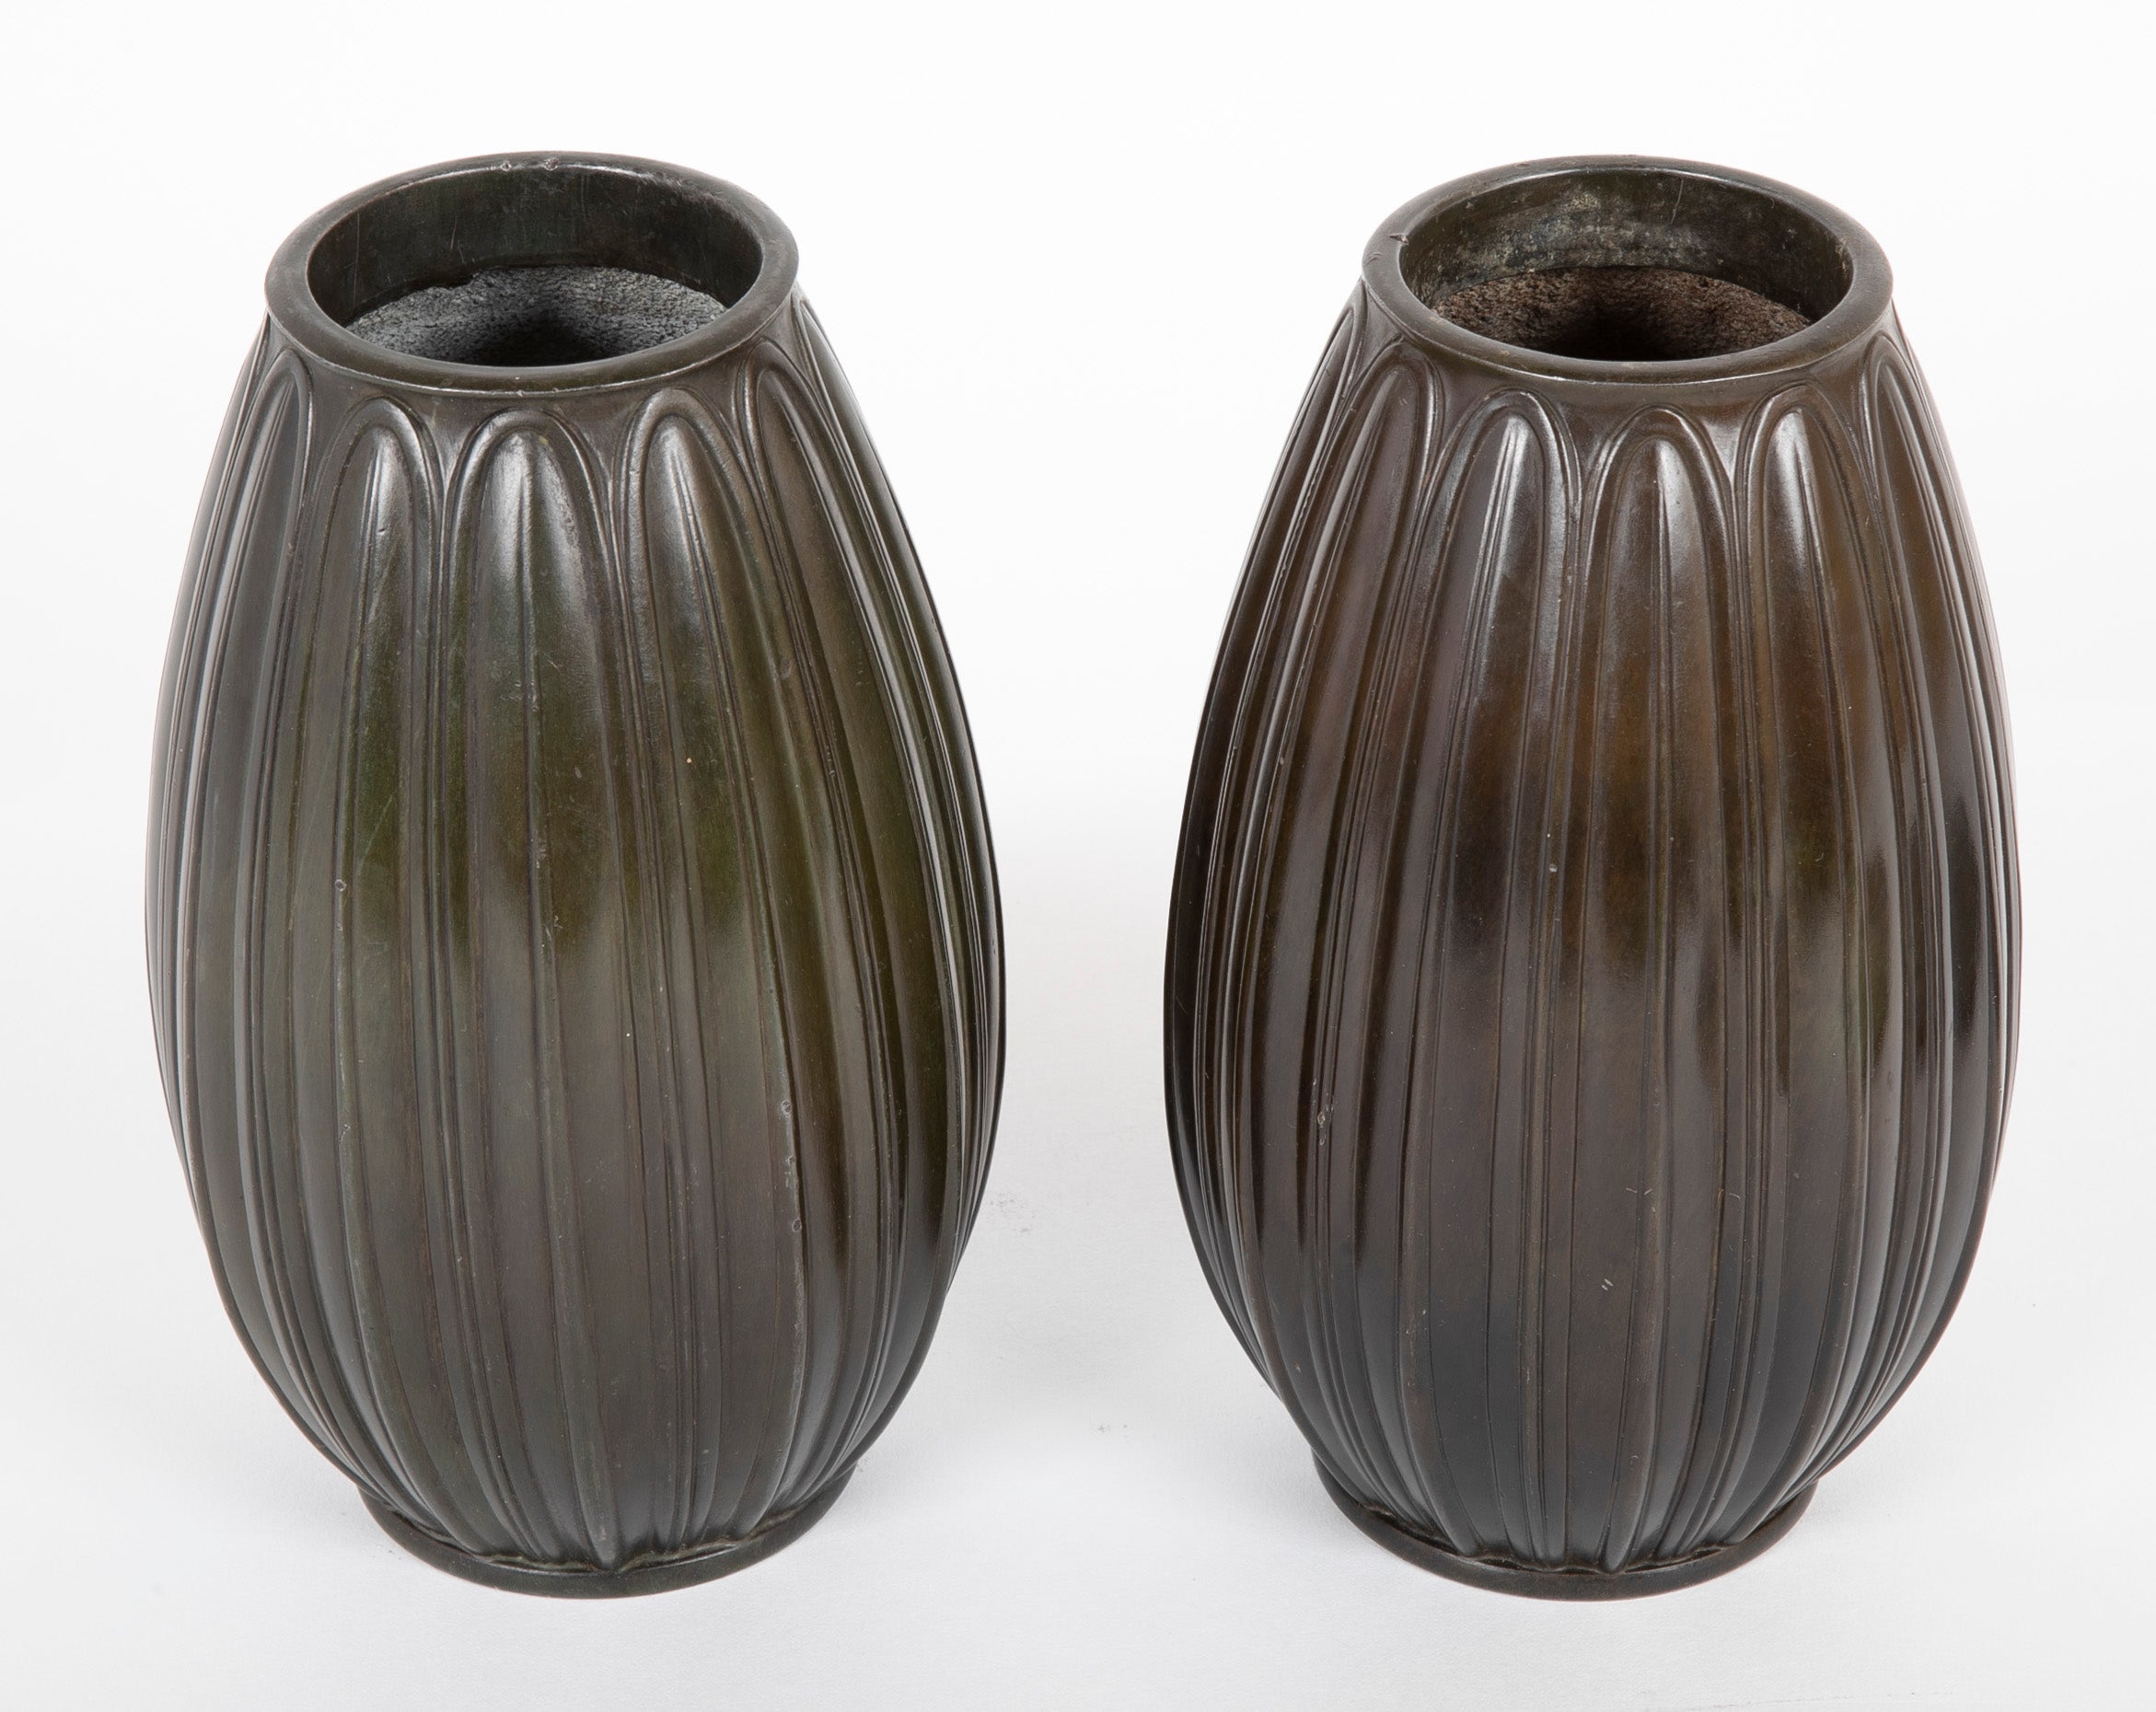 Pair of Andersen Ovoid Patinated Metal Vases – Avery Dash Collections